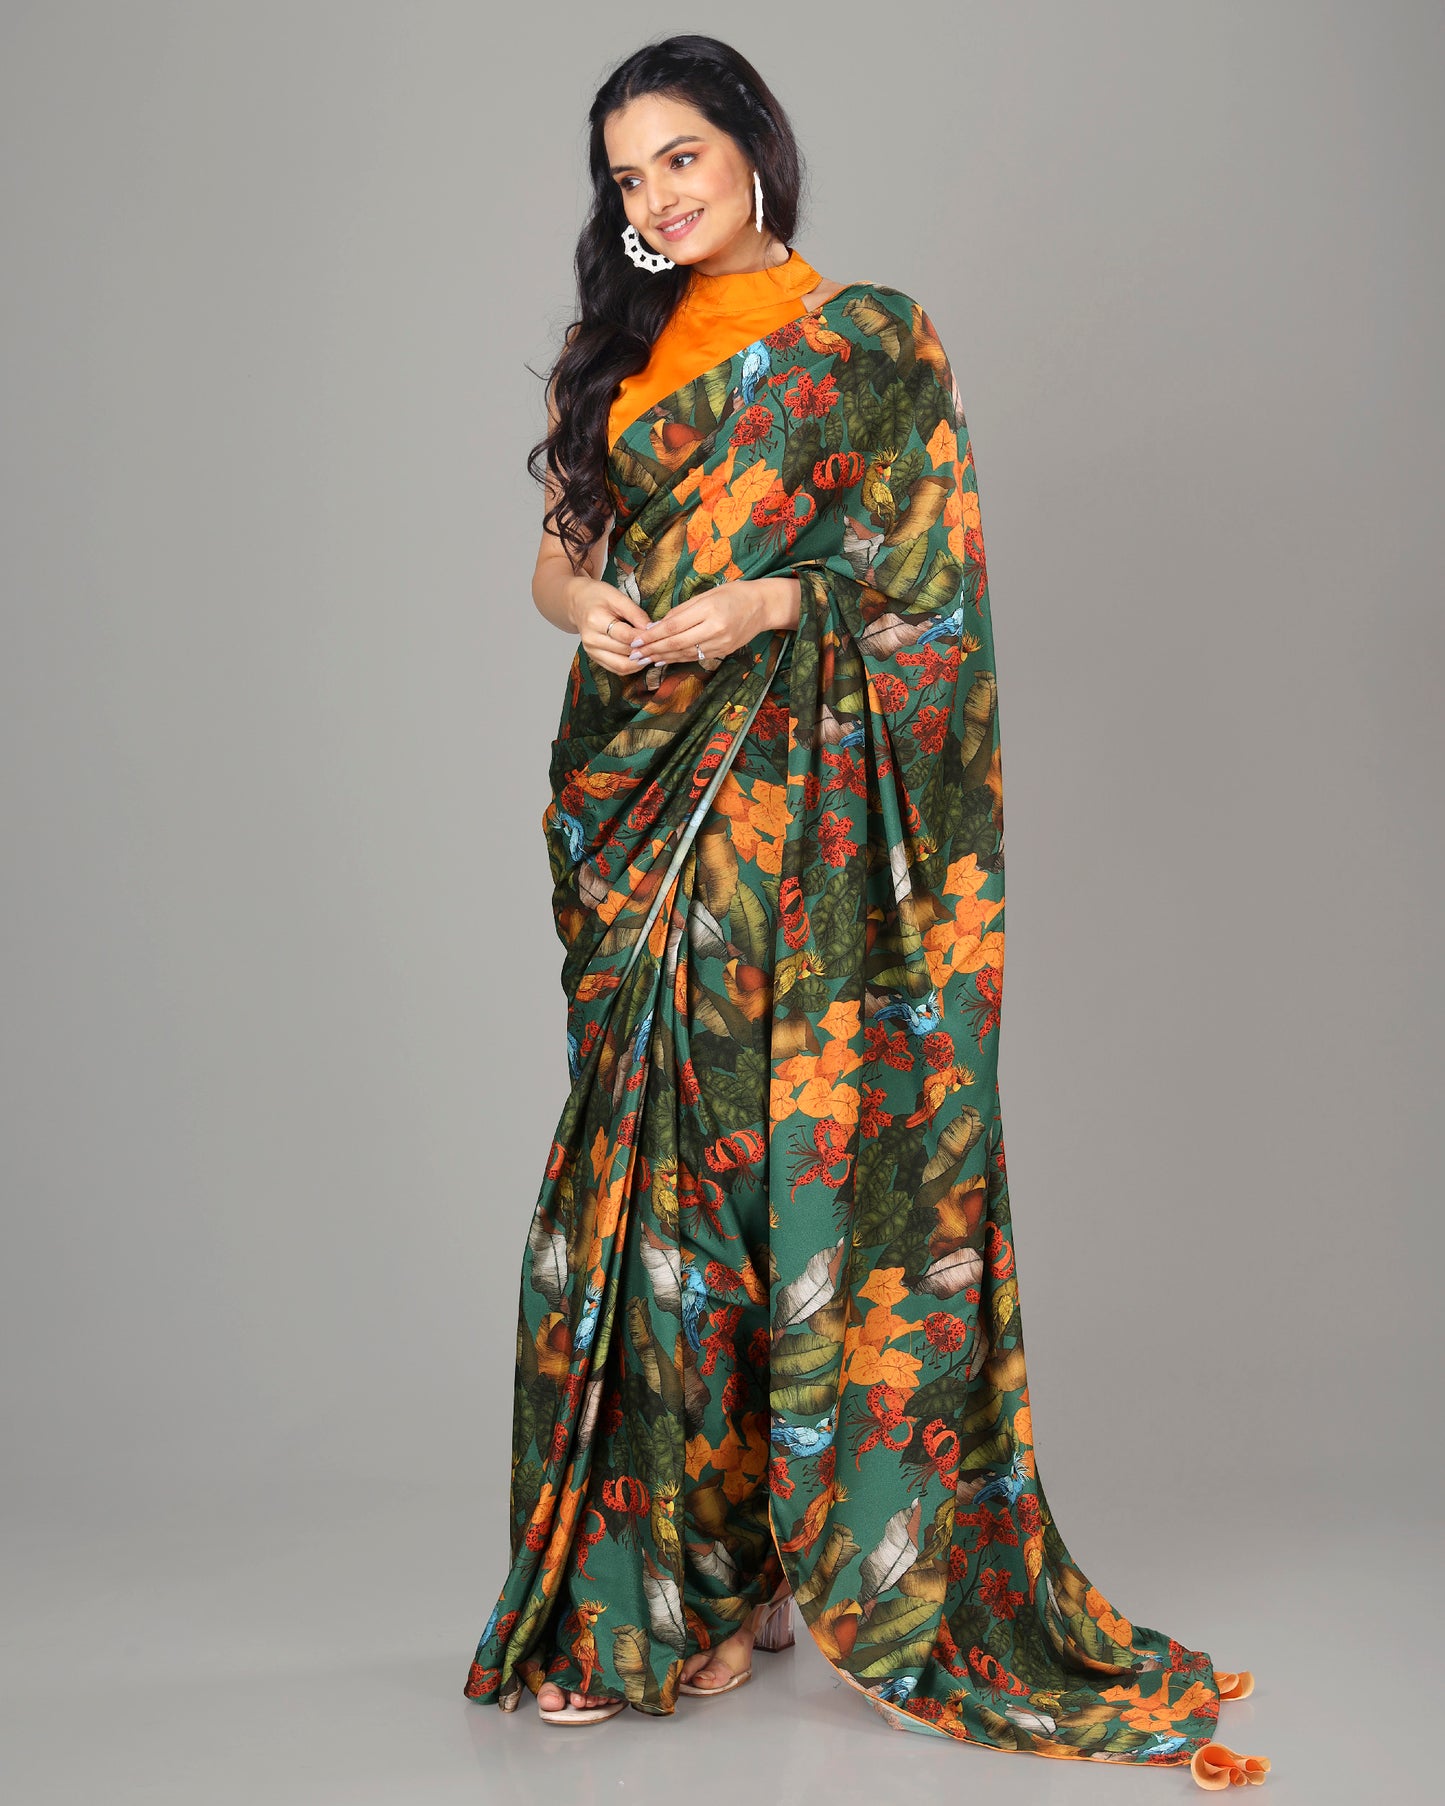 Bestselling Floral Women's Designer Bollywood Pre-Draped Saree